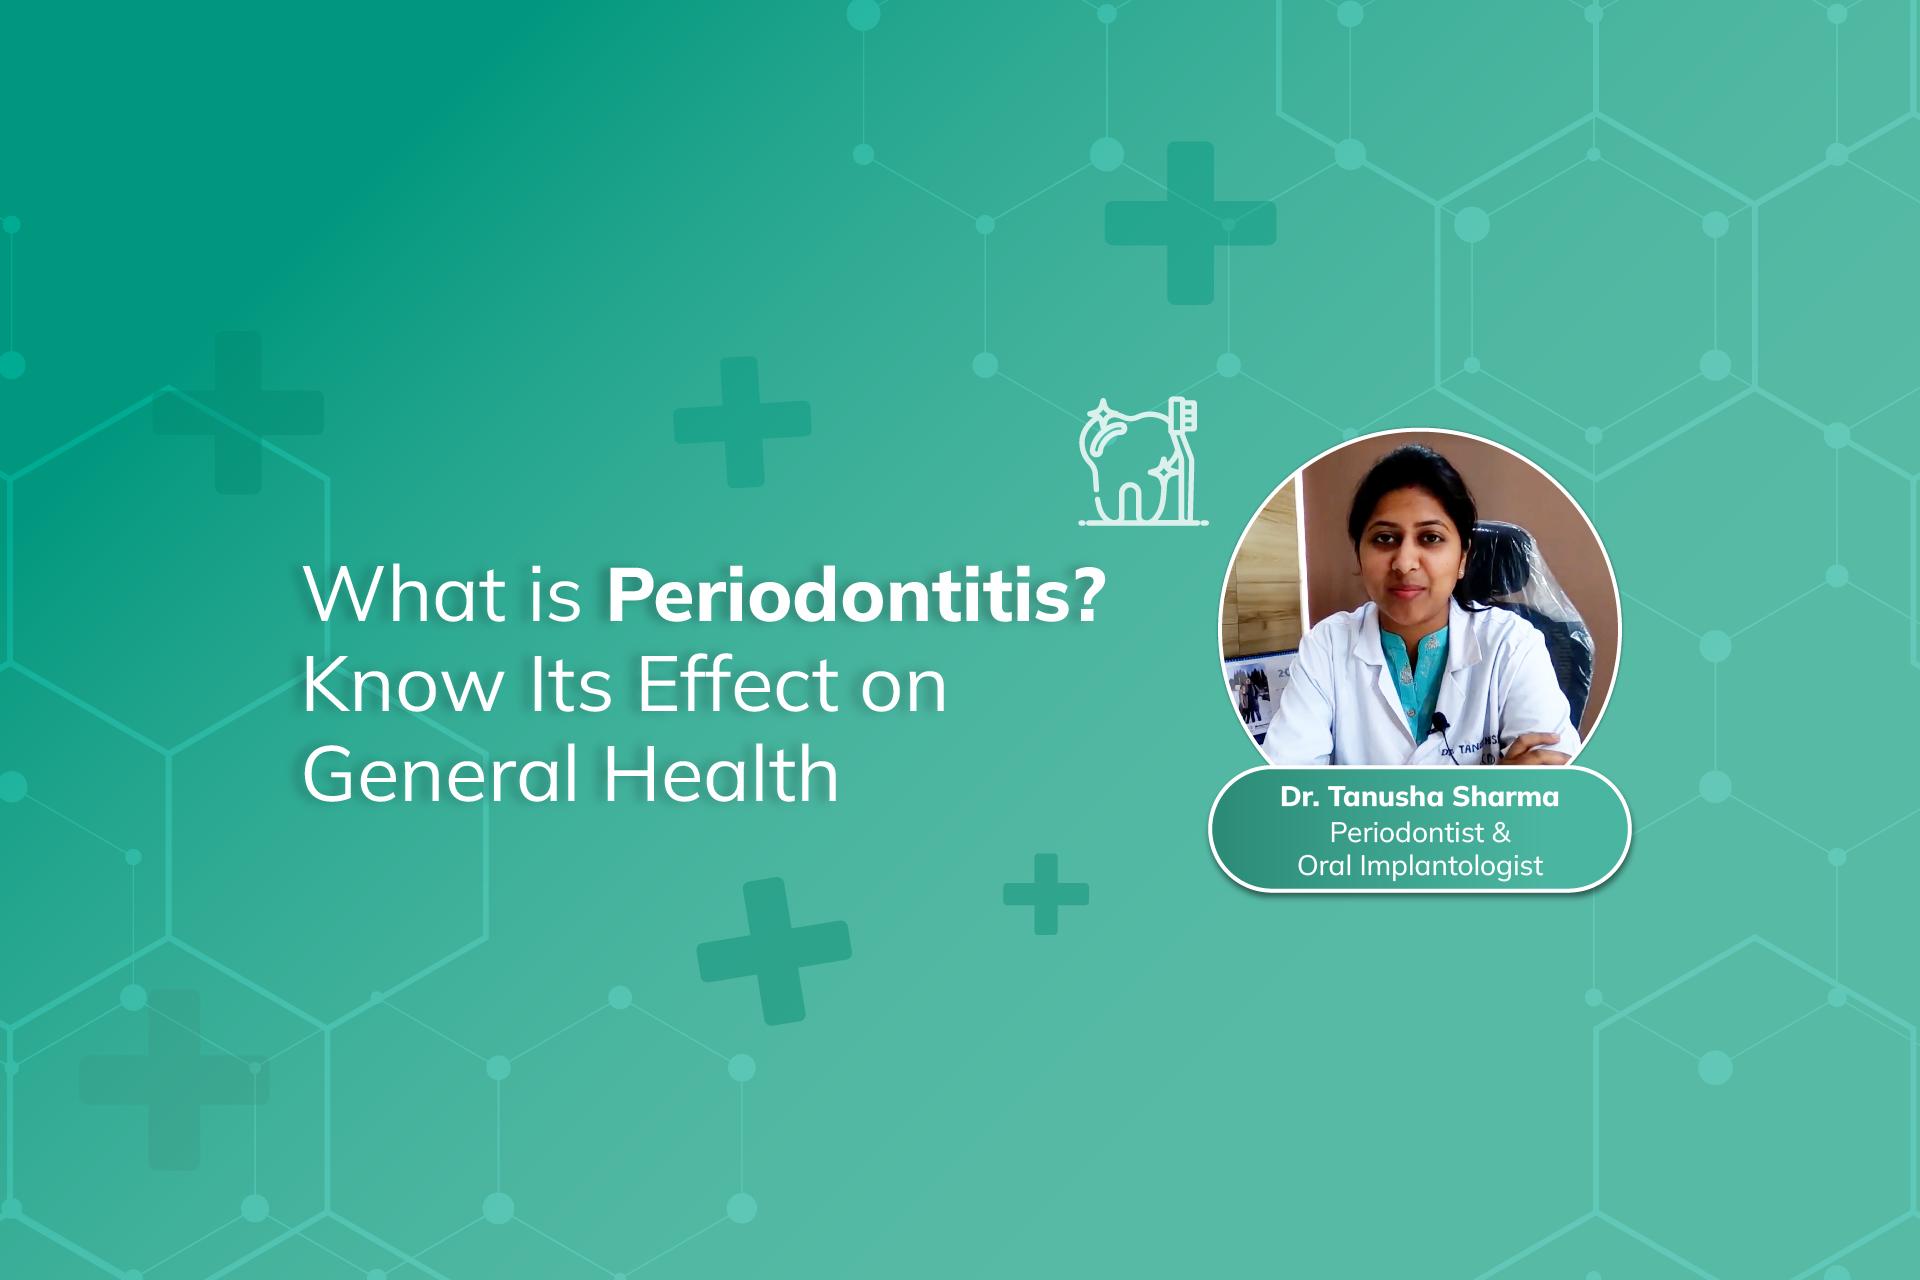 What is Periodontitis: Effect on General Health with Dr. Tanusha Sharma